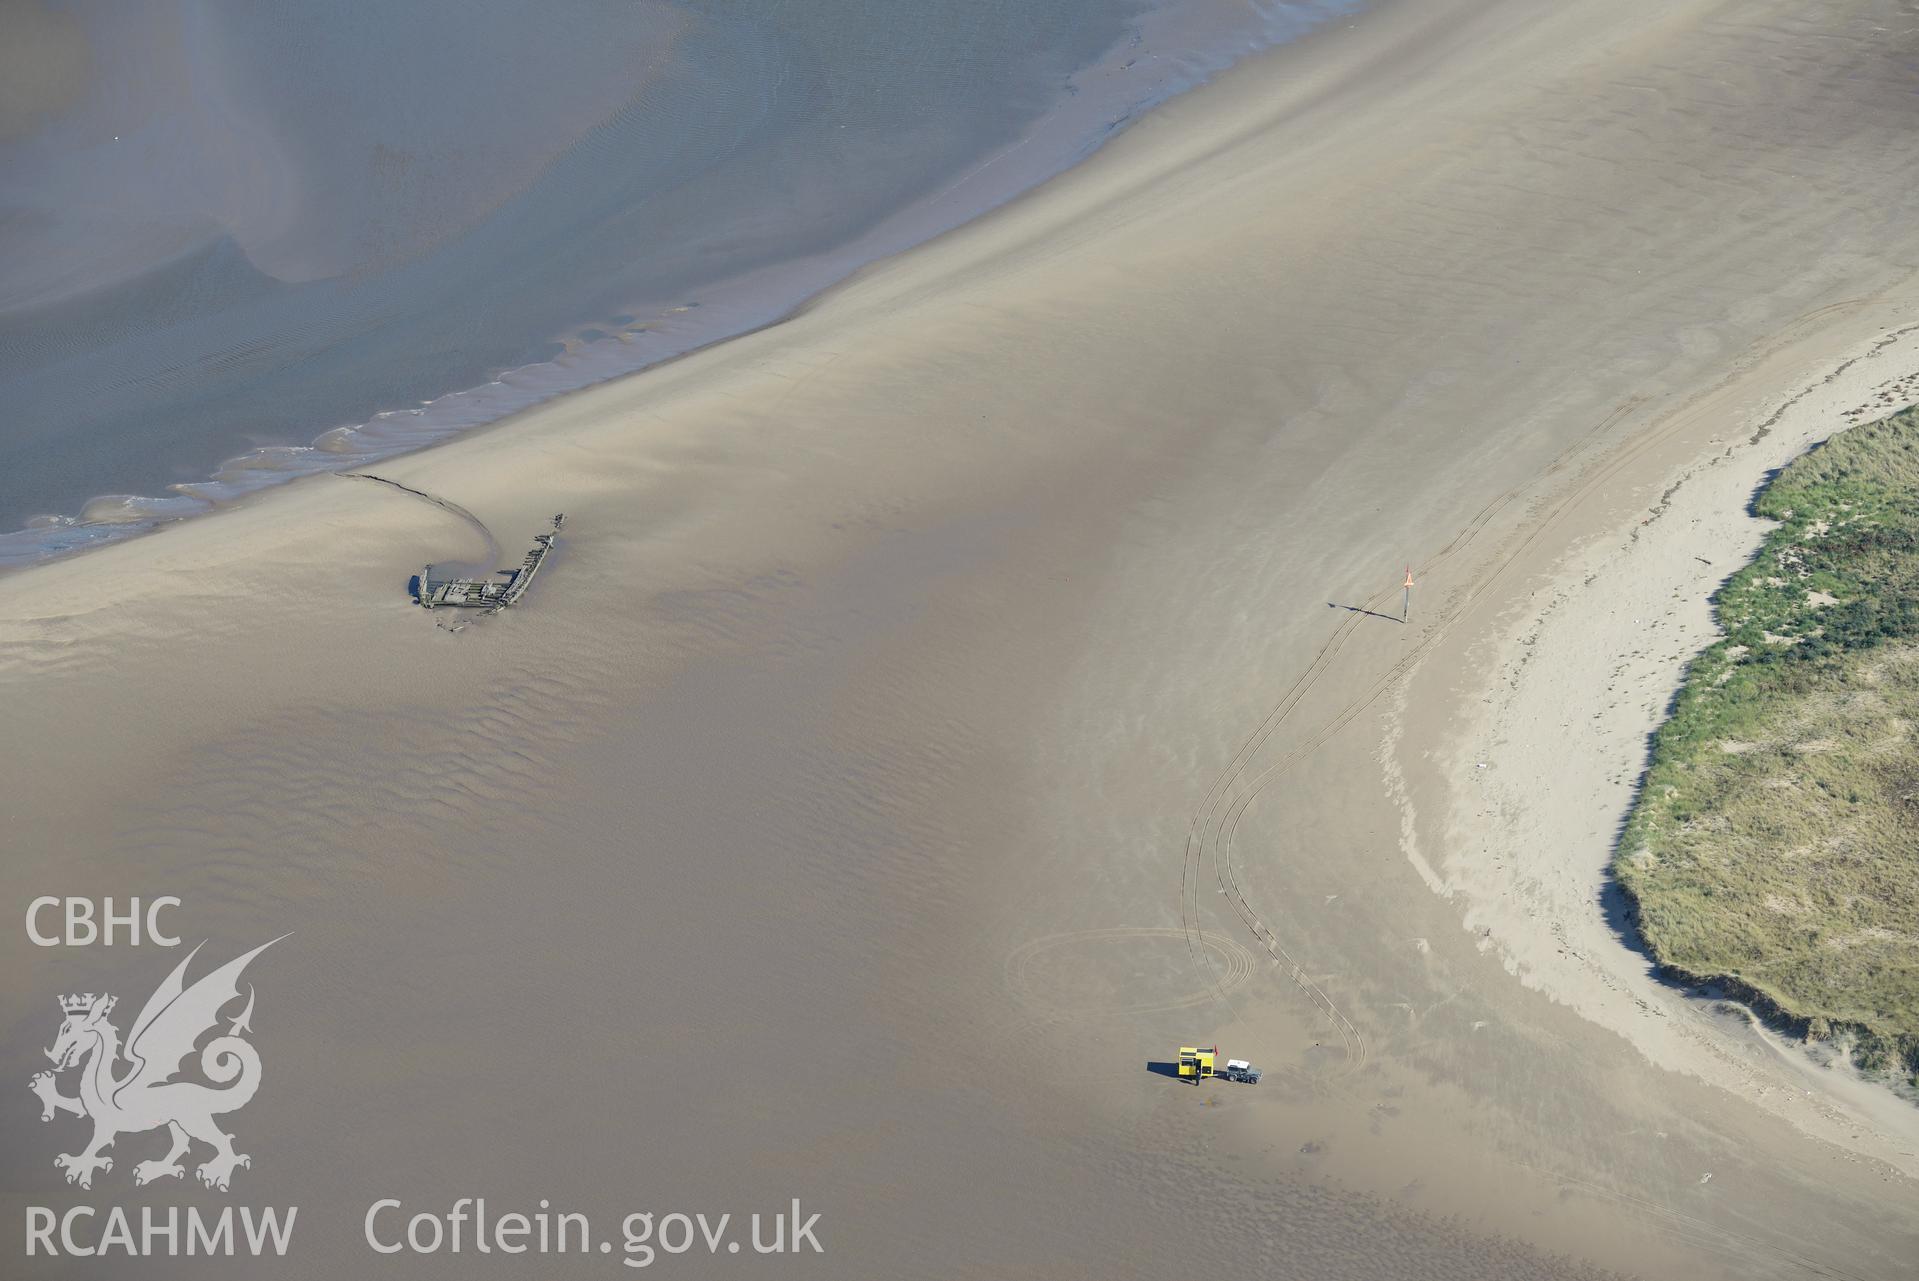 The wreck of 'Paul,' a wooden 4-masted schooner, on Cefn Sidan Sands, west of Kidwelly. Oblique aerial photograph taken during the Royal Commission's programme of archaeological aerial reconnaissance by Toby Driver on 30th September 2015.